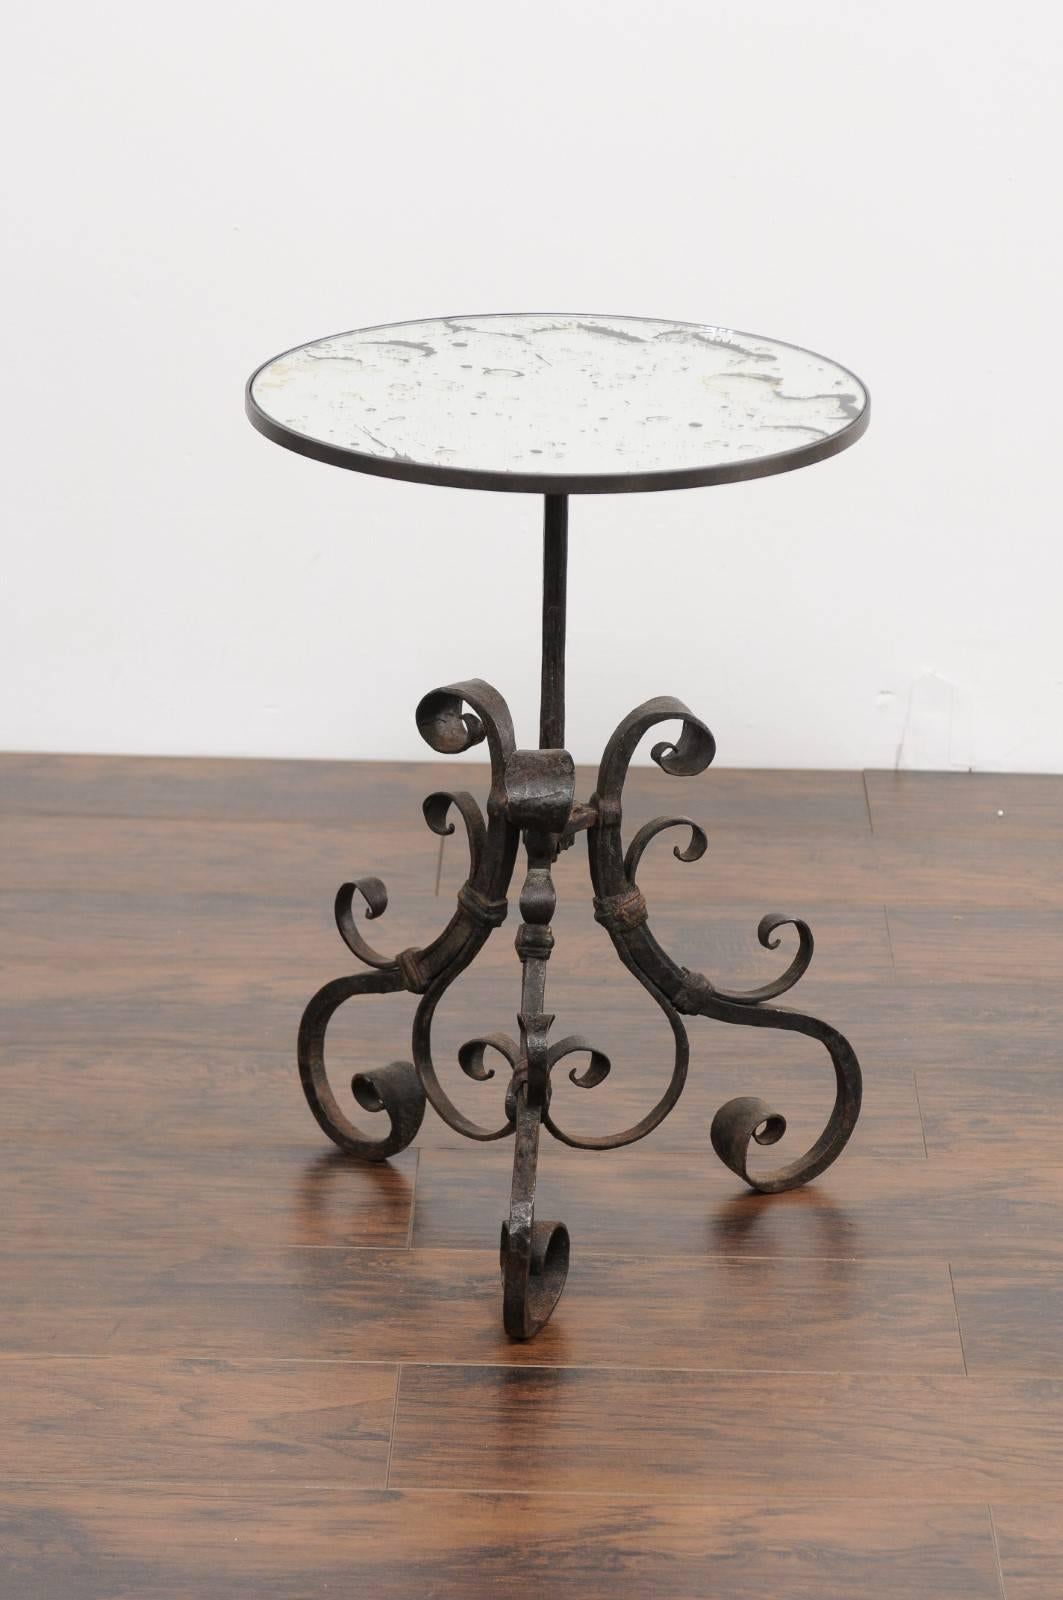 19th Century Italian Wrought-Iron Pedestal Side Table with Antique Mirror Top, circa 1870